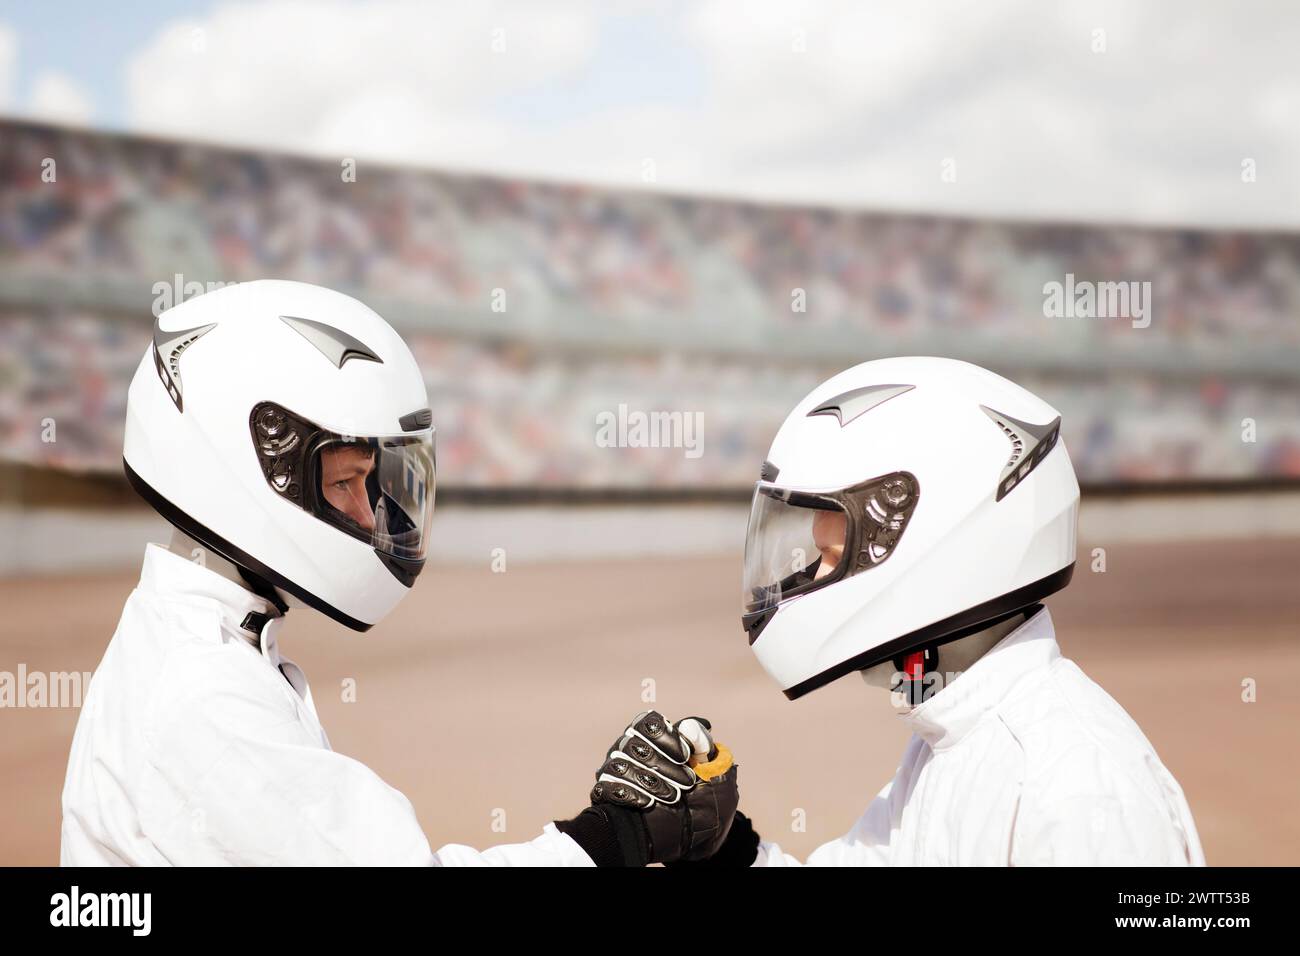 Two motorcyclists in white suits and helmets sharing a fist bump before a race. Stock Photo